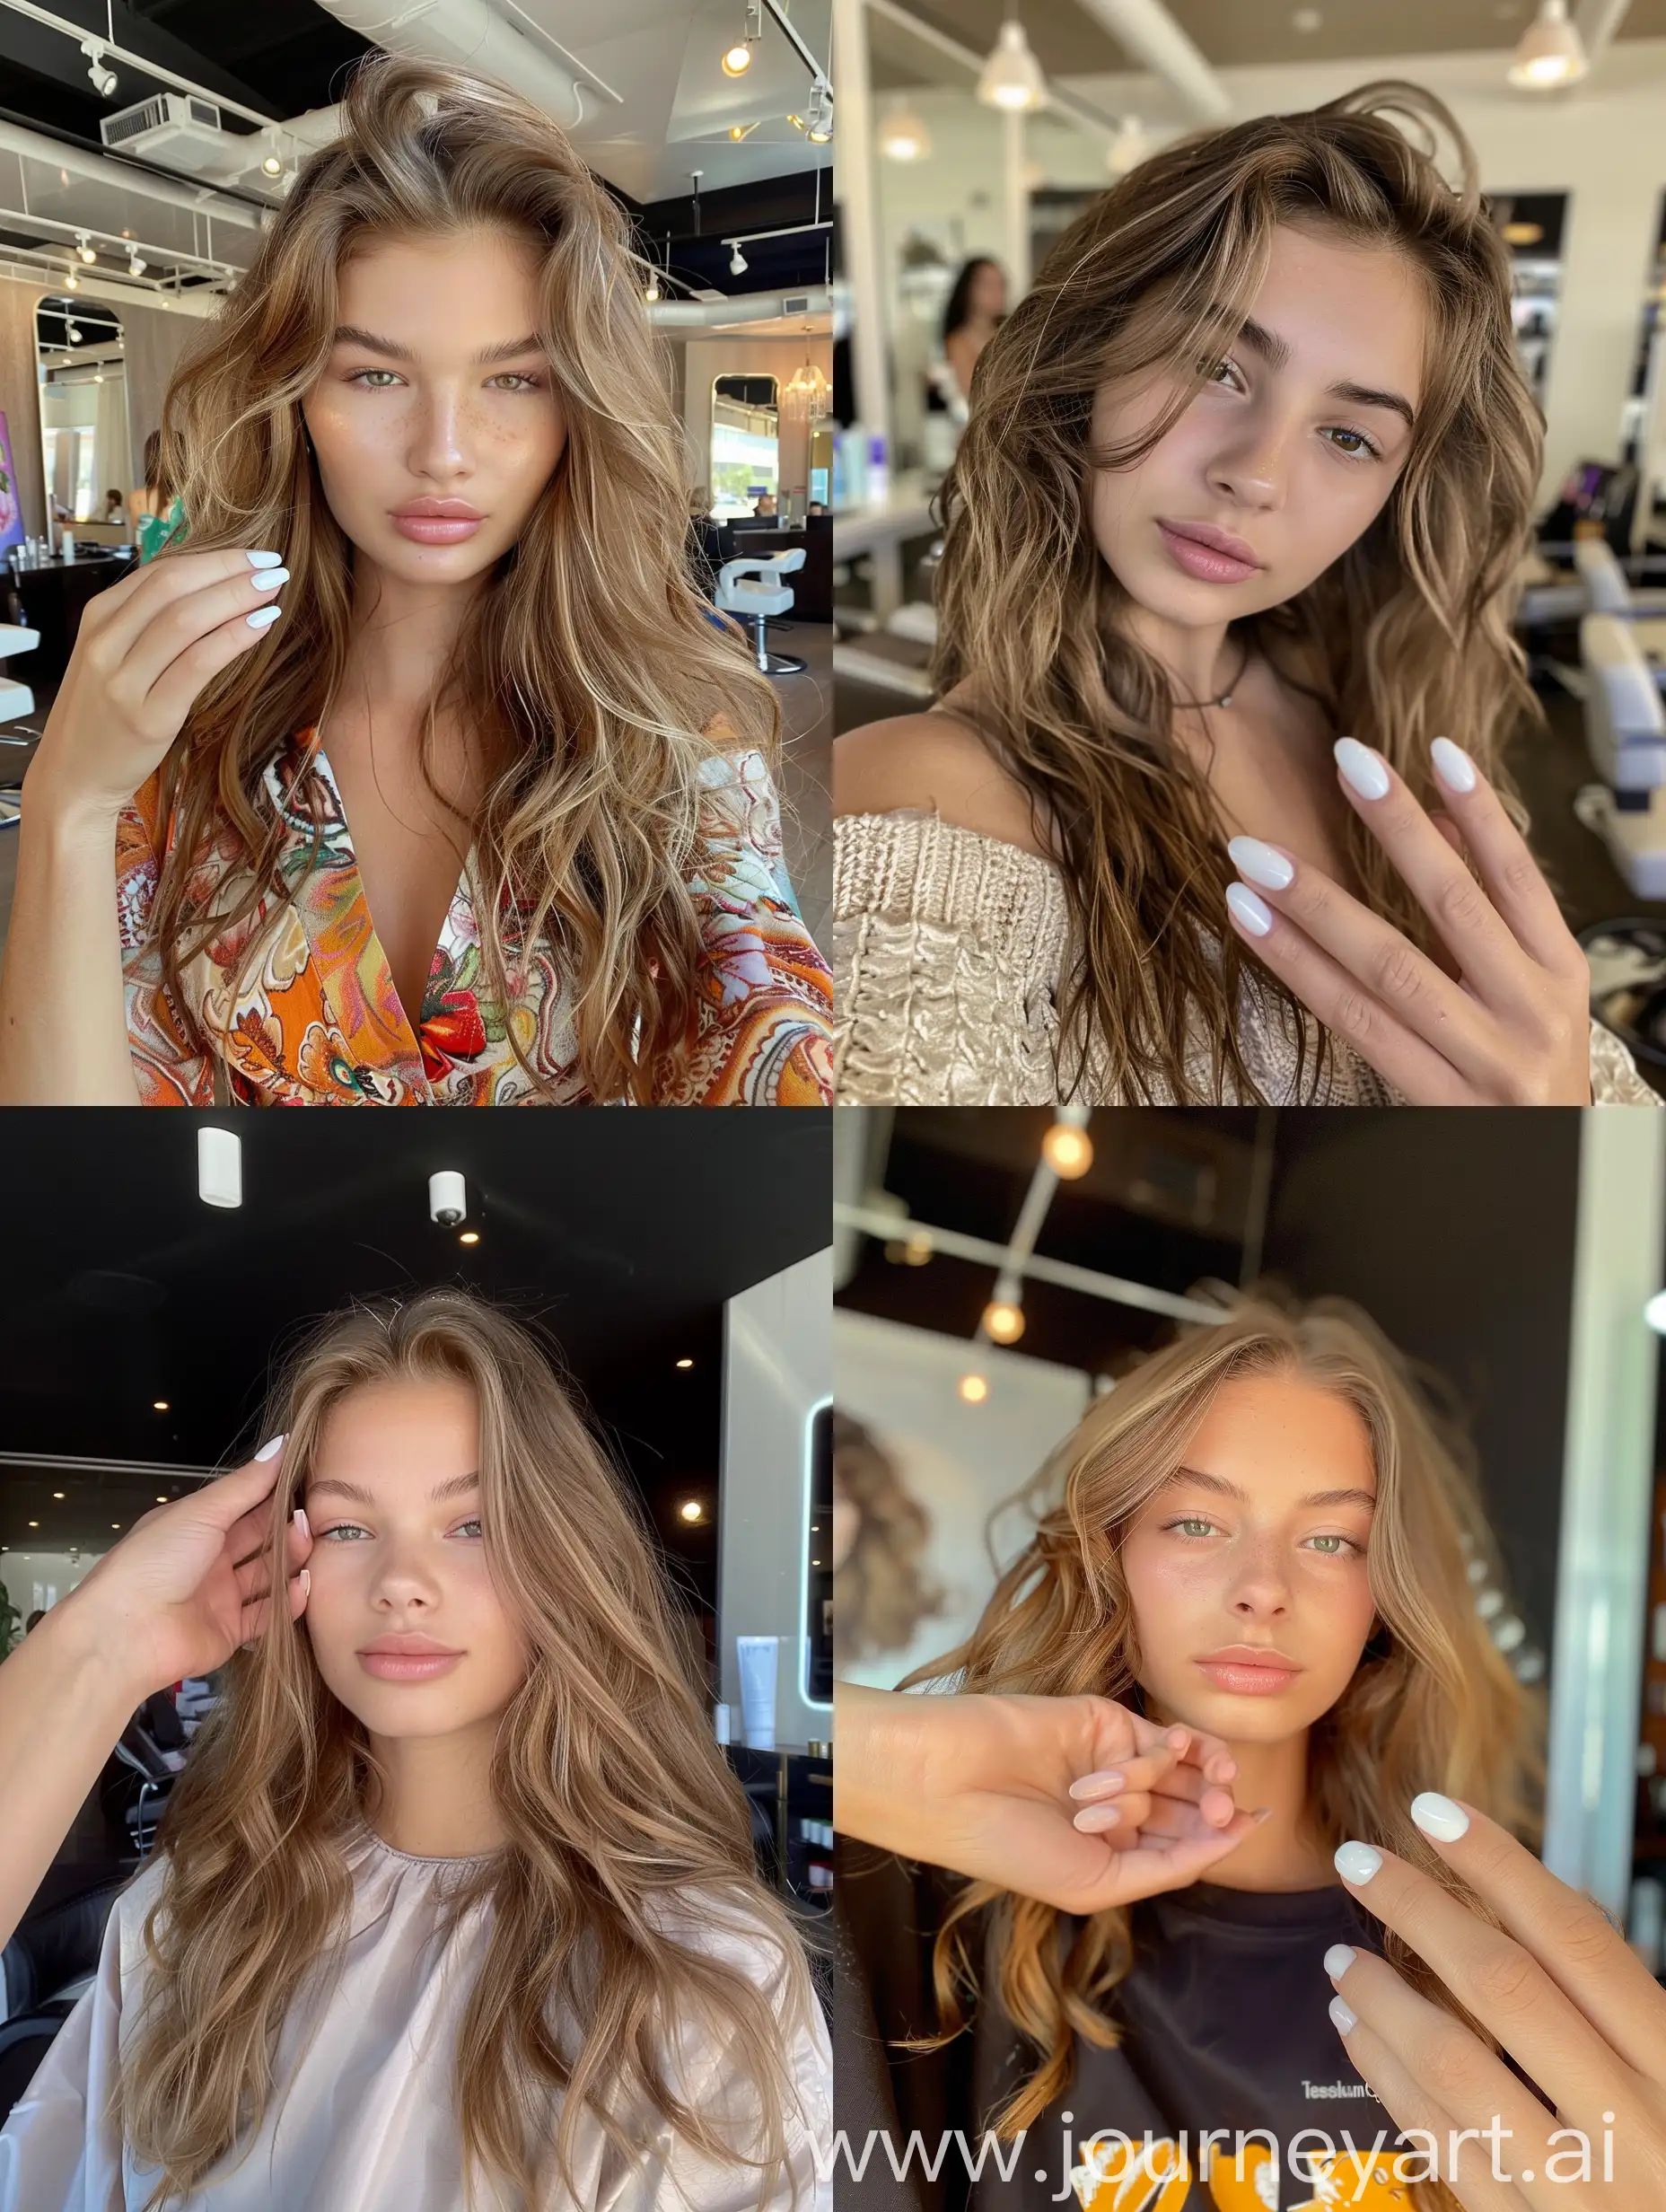 Aesthetic Instagram selfie of a gorgeous super model girl, 17 years old, at the salon getting her hair done, a womans hand in frame, white gel nail polish